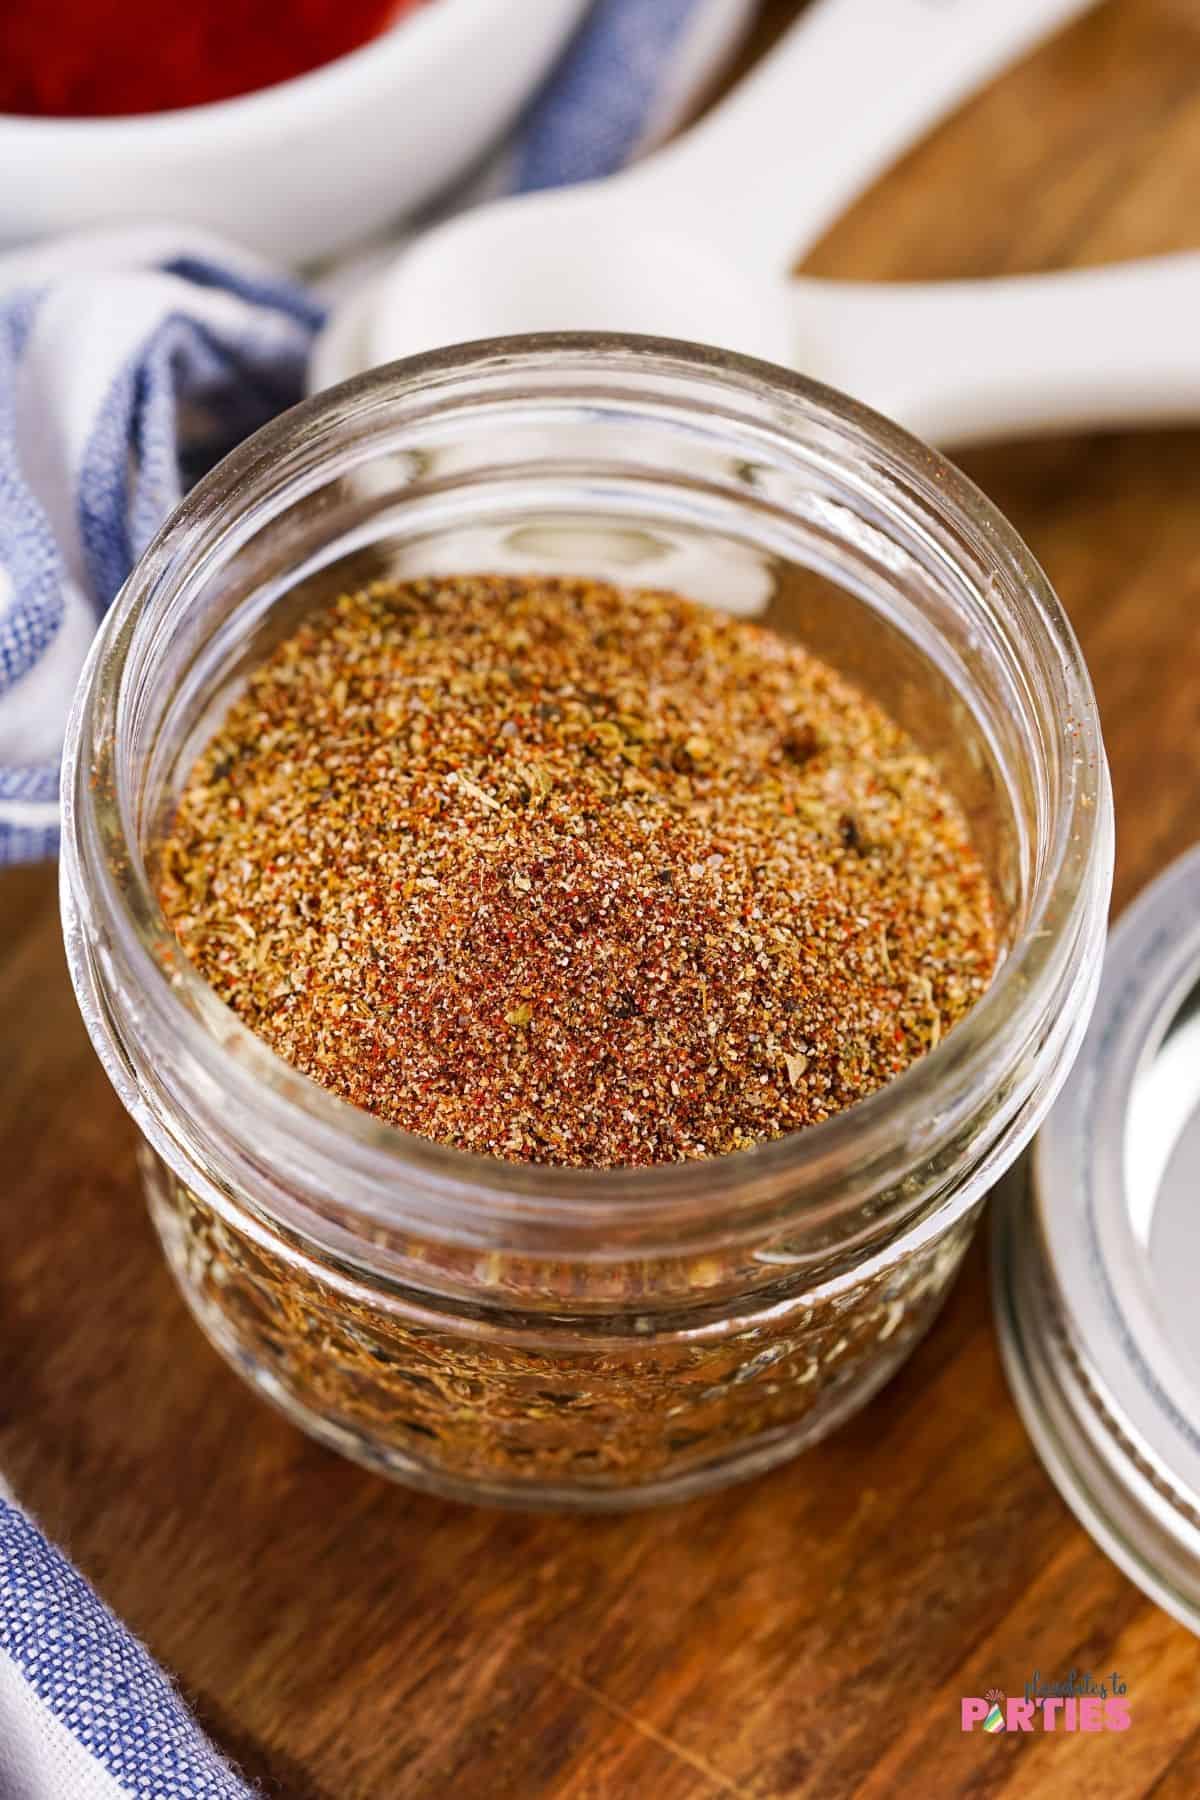 A glass jar filled with taco seasoning mix.